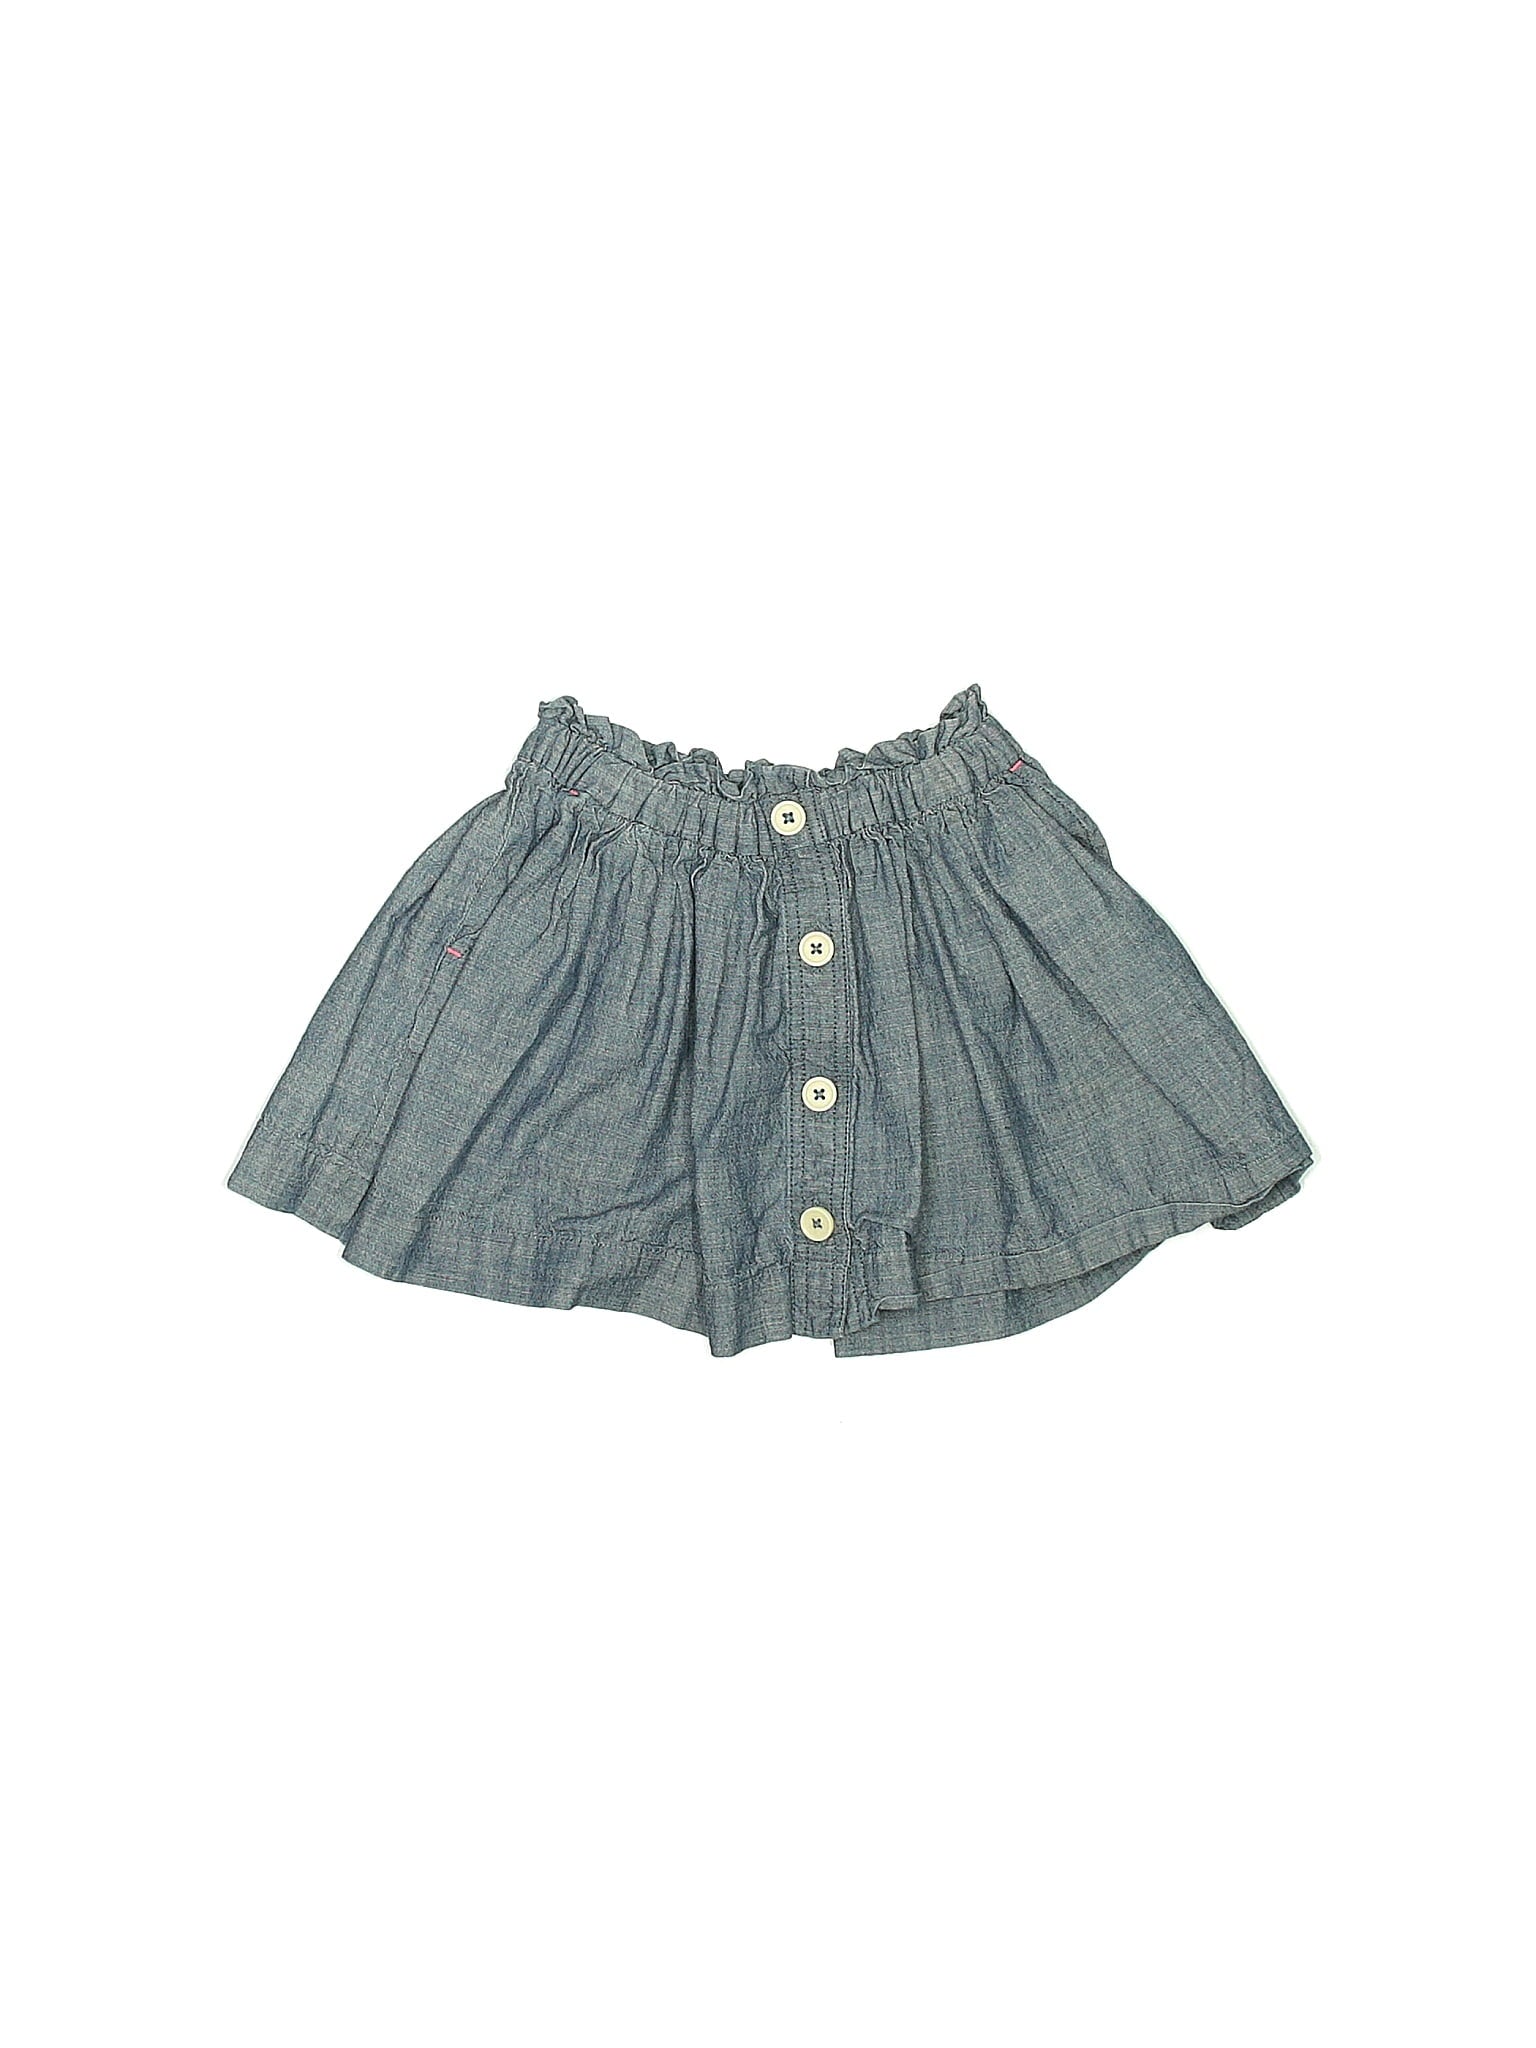 Skirt size - S (Youth)